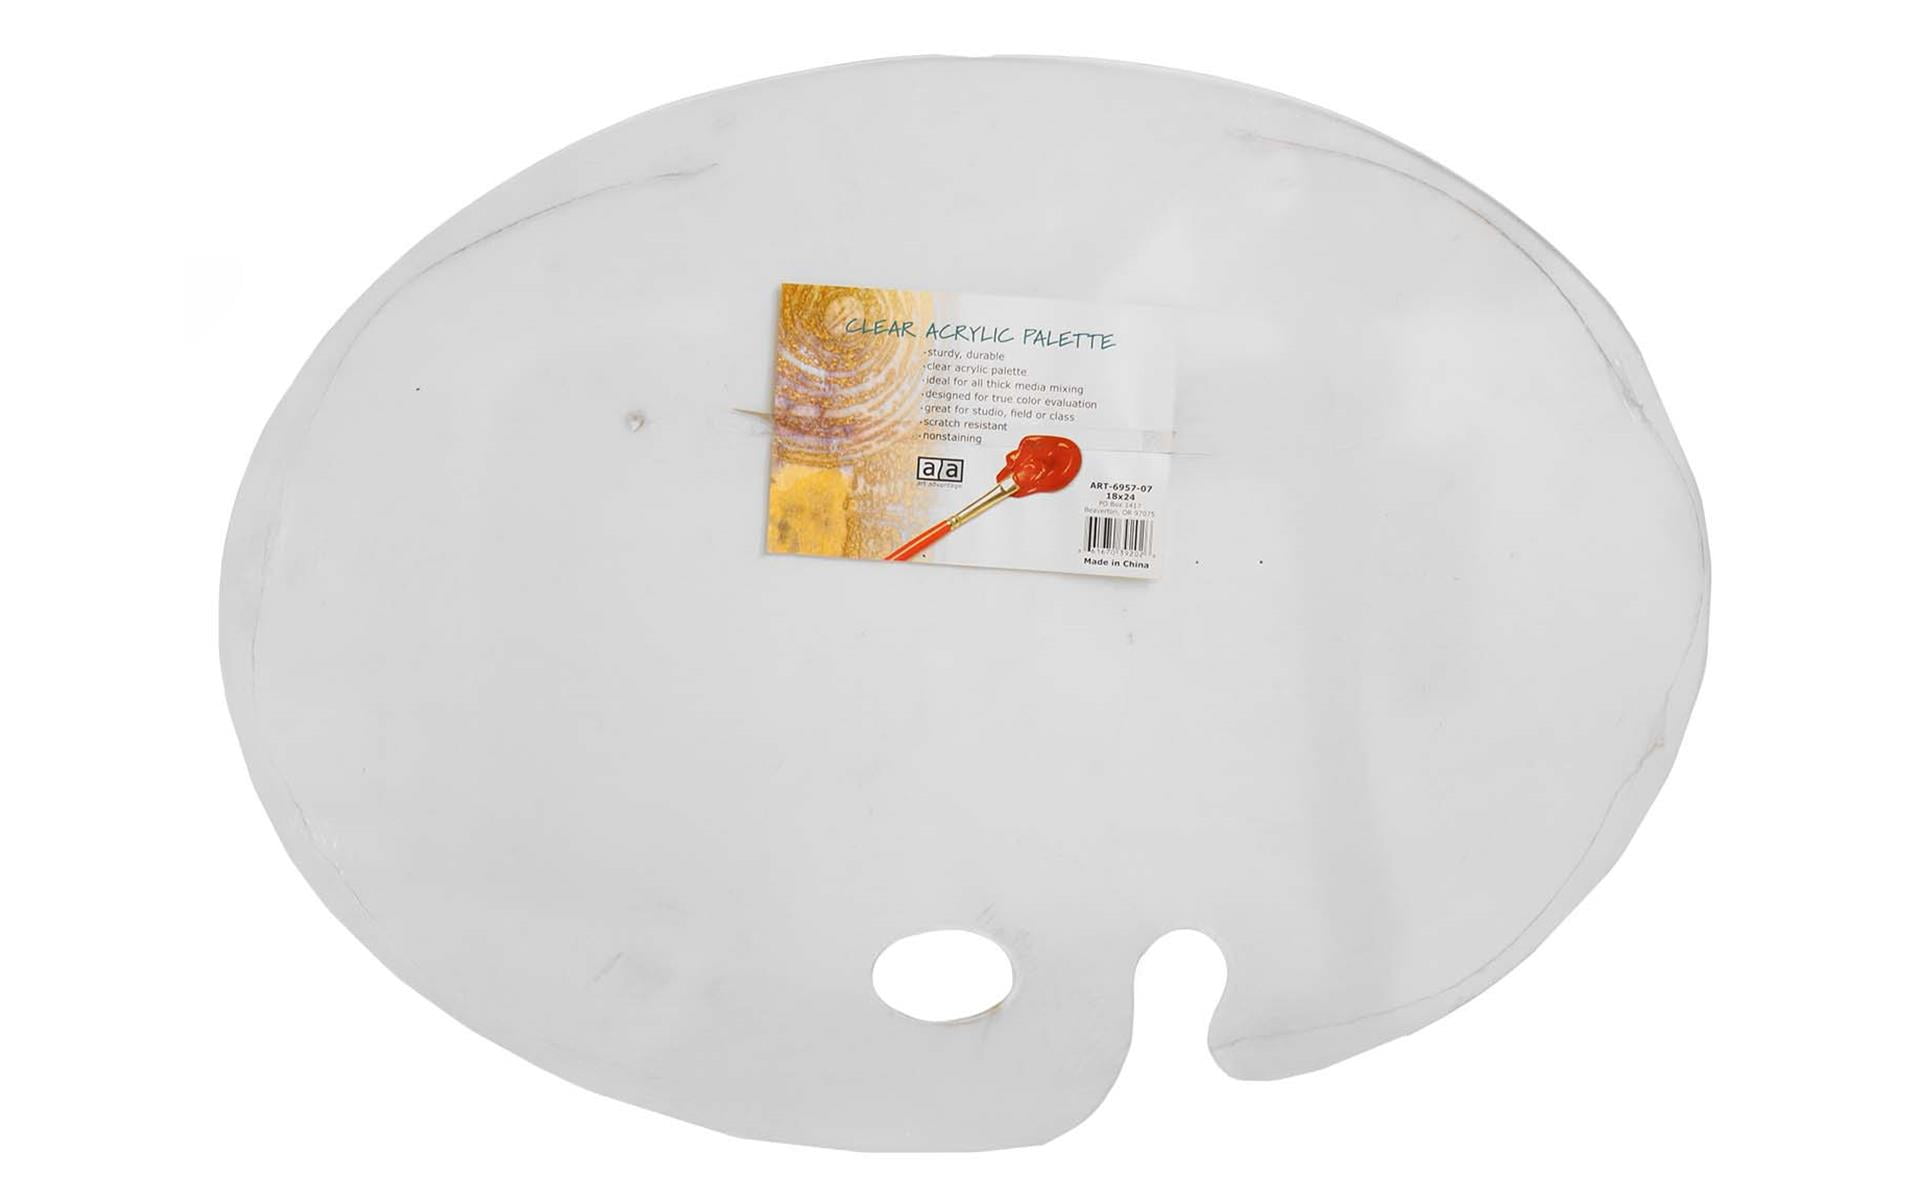 U.S. Art Supply 9.5 x 13.8 Clear Oval-Shaped Acrylic Painting Palette -  Transparent Plastic Artist Paint Color Mixing Tray - Non-Stick, Easy Clean,  Mix Acrylic, Oil - Adults, Kids, Students Crafts 